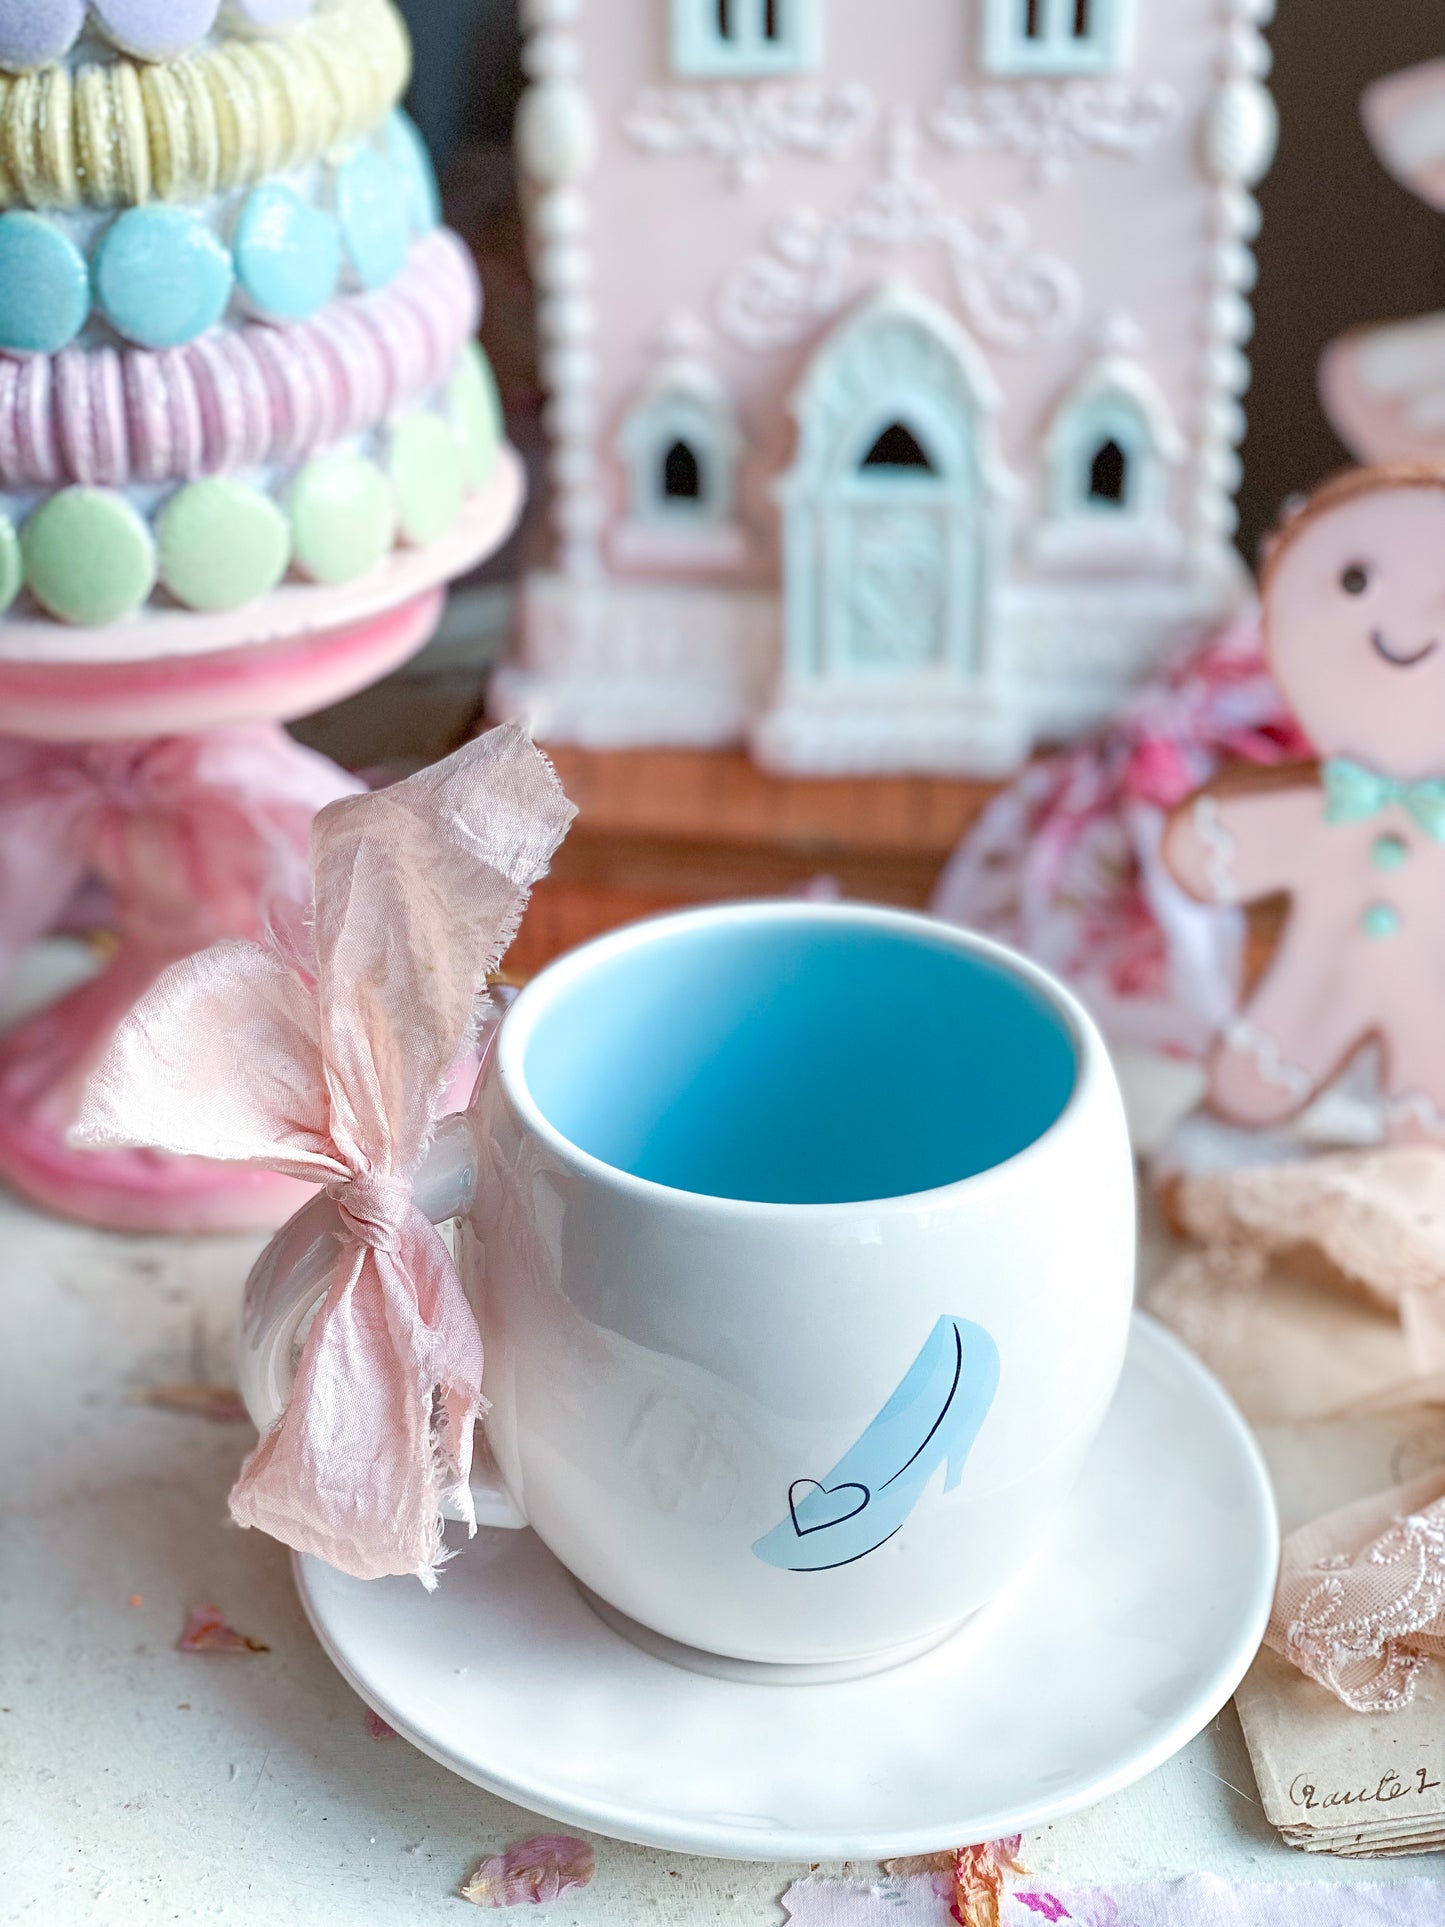 Disney’s Cinderella Princess Rae Dunn Teacup with glass slipper in pastel blue